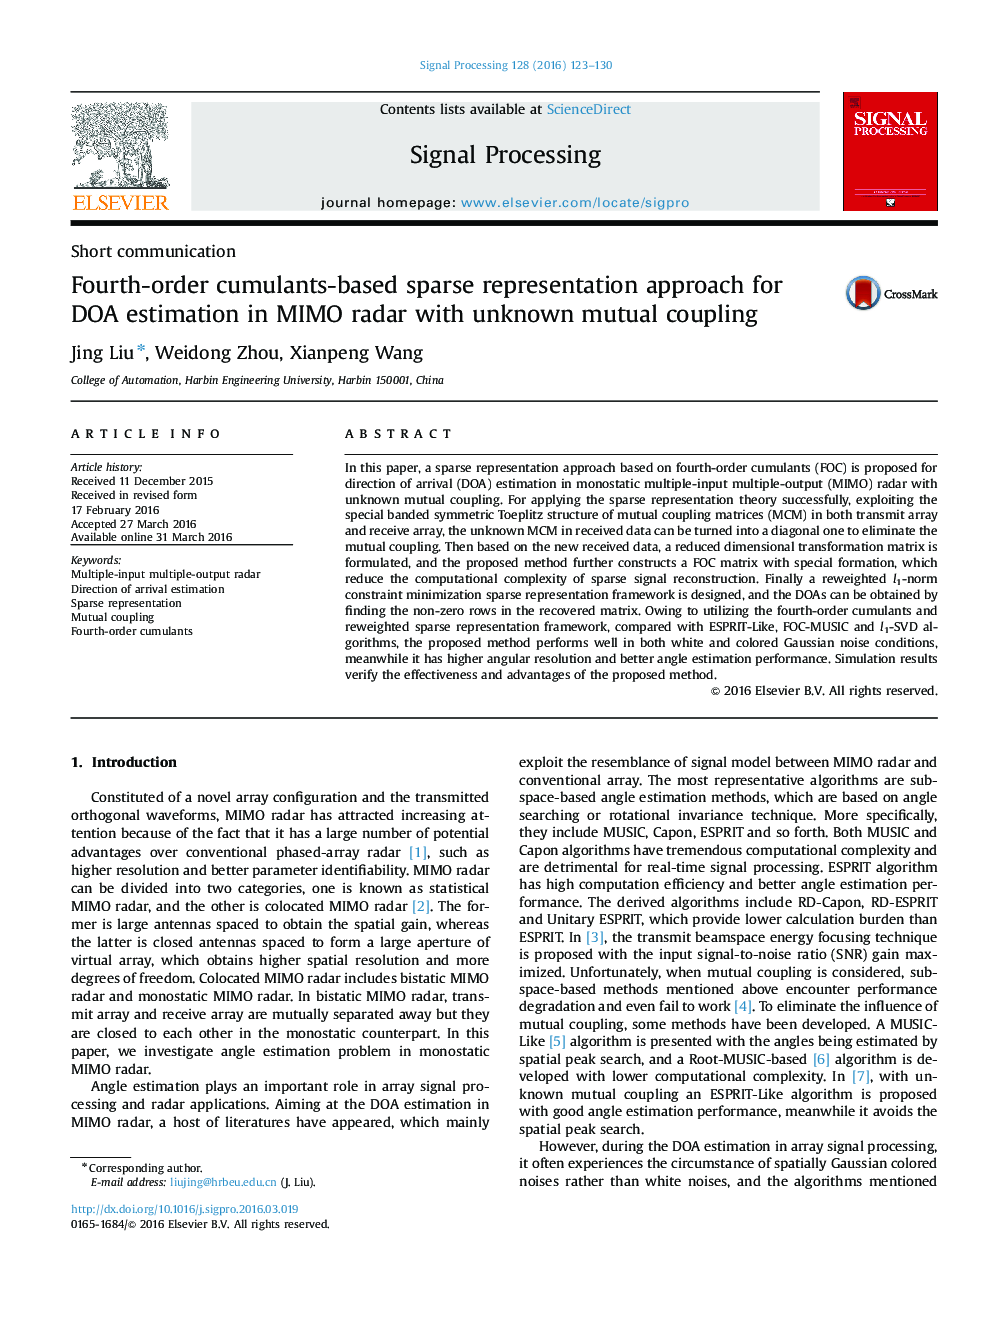 Fourth-order cumulants-based sparse representation approach for DOA estimation in MIMO radar with unknown mutual coupling